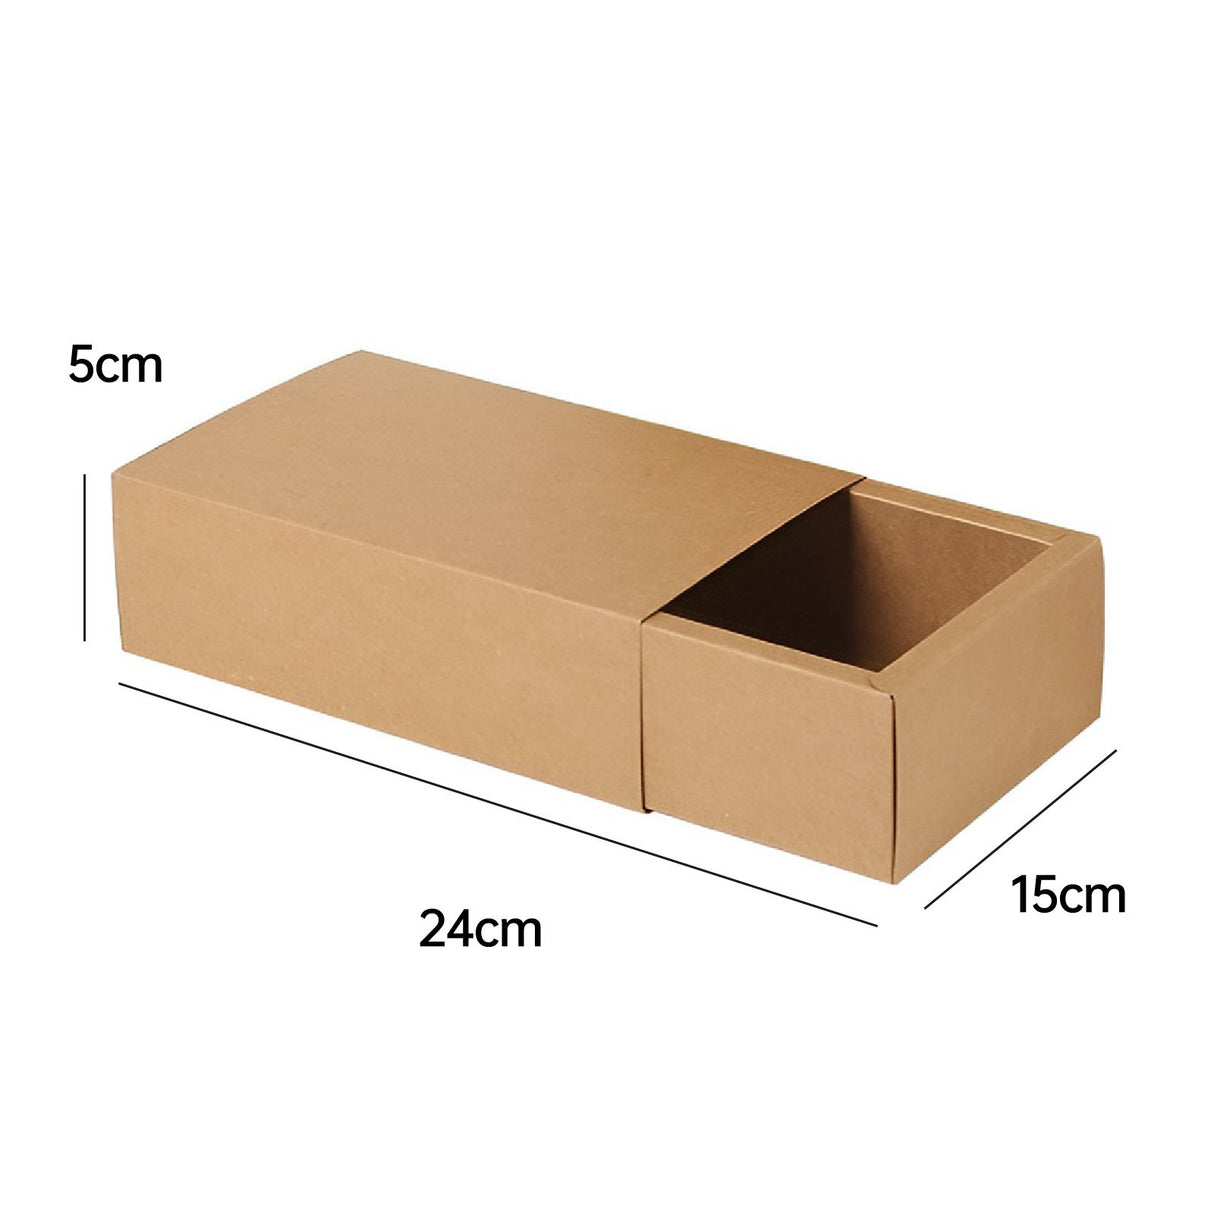 Organize Efficiently with Our Versatile Slide Box